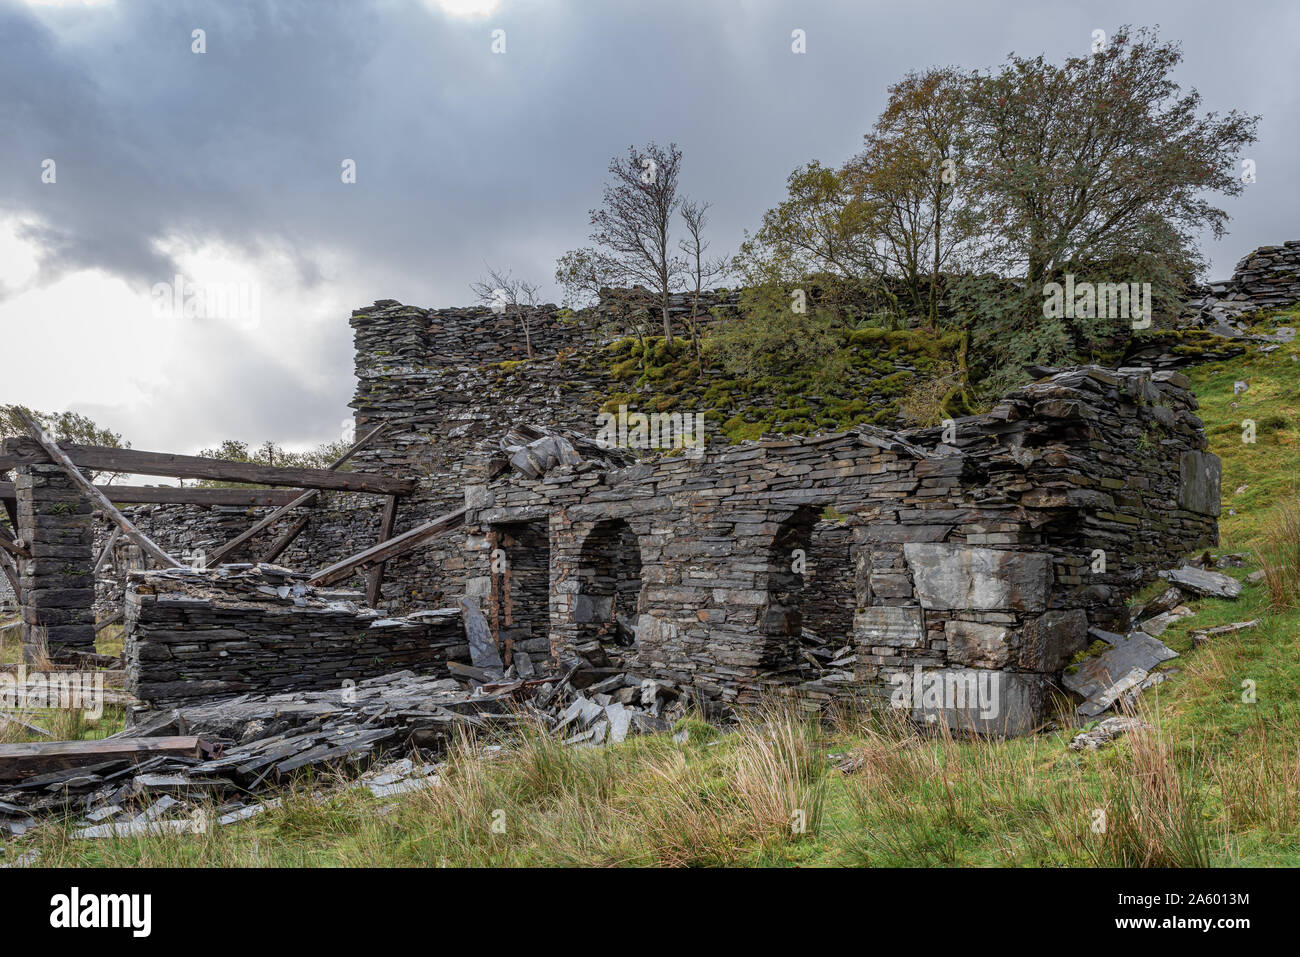 The abandoned Rhos Slate Quarry at Capel Curig, below Moel Siabod in the Snowdonia National Park, Wales Stock Photo